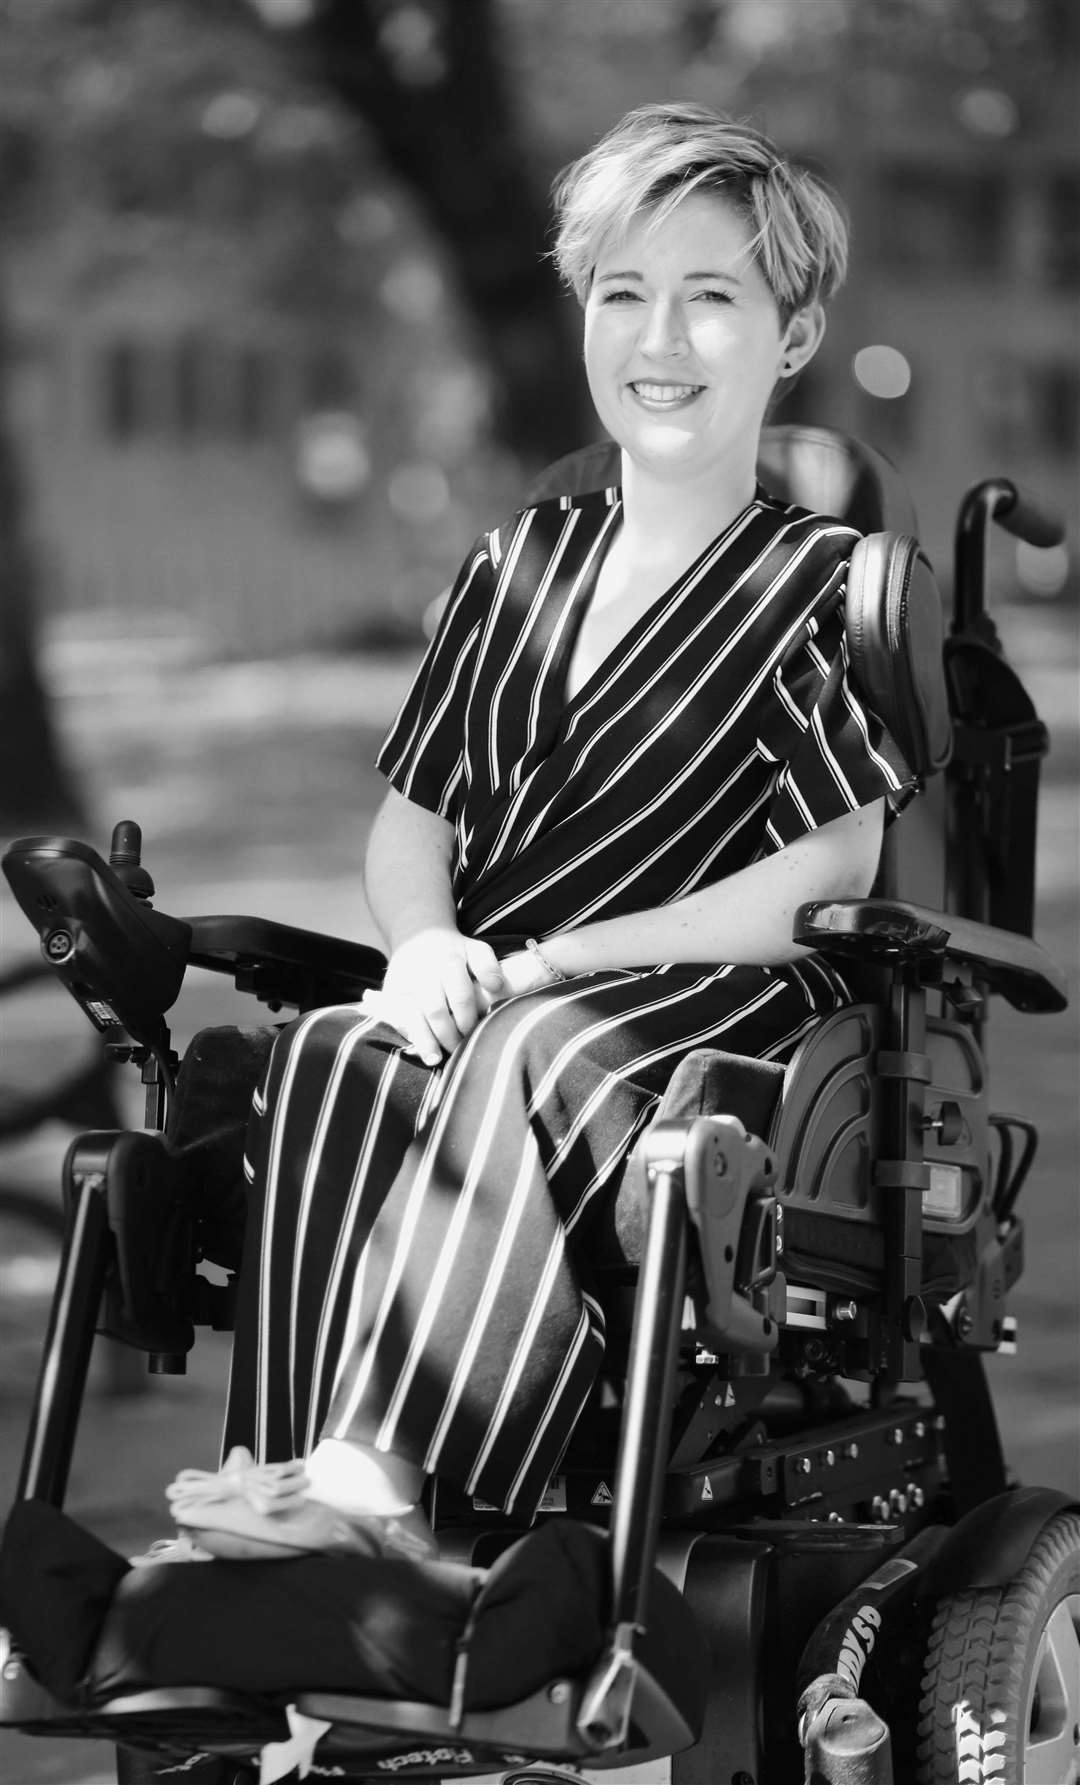 Campaigner Sarah Rennie has called for clear Government guidance and codes of practice for businesses to ensure the safety of their mobility-impaired employees (Sarah Rennie/PA)